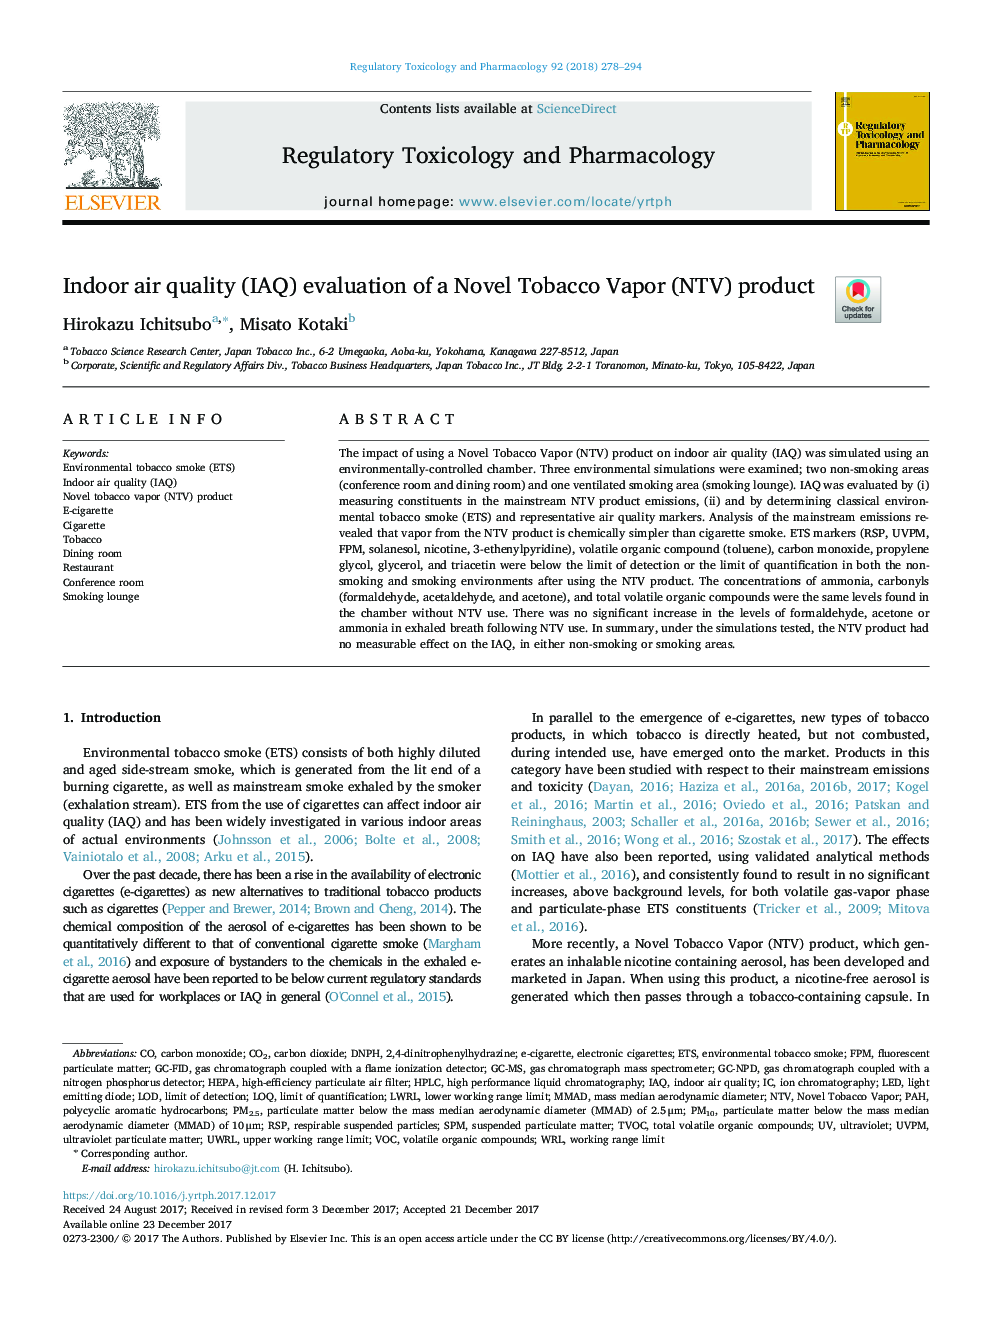 Indoor air quality (IAQ) evaluation of a Novel Tobacco Vapor (NTV) product